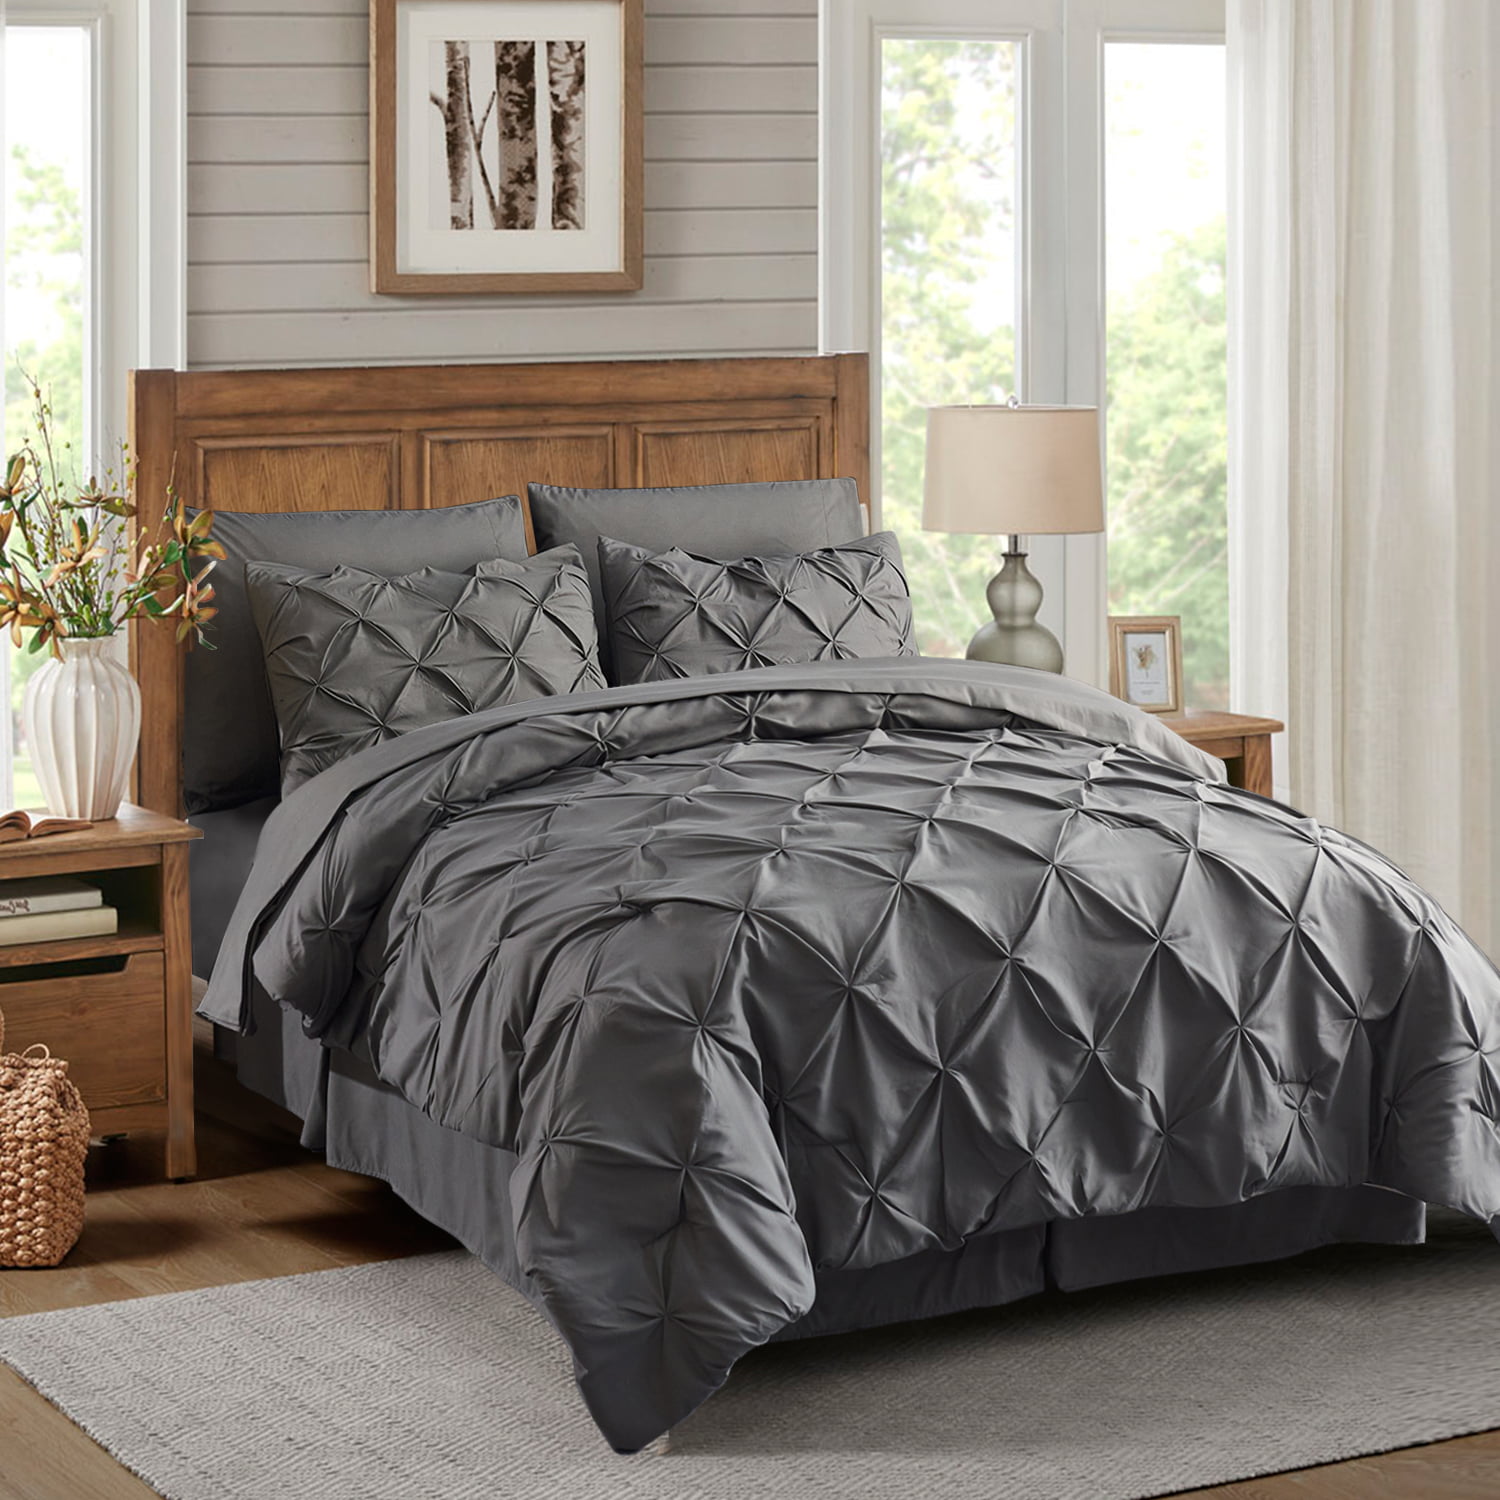 Details about   8 Piece Pinch Pleat Pintuck Comforter Set Bed-in-a-Bag Comforter Cal King/King 